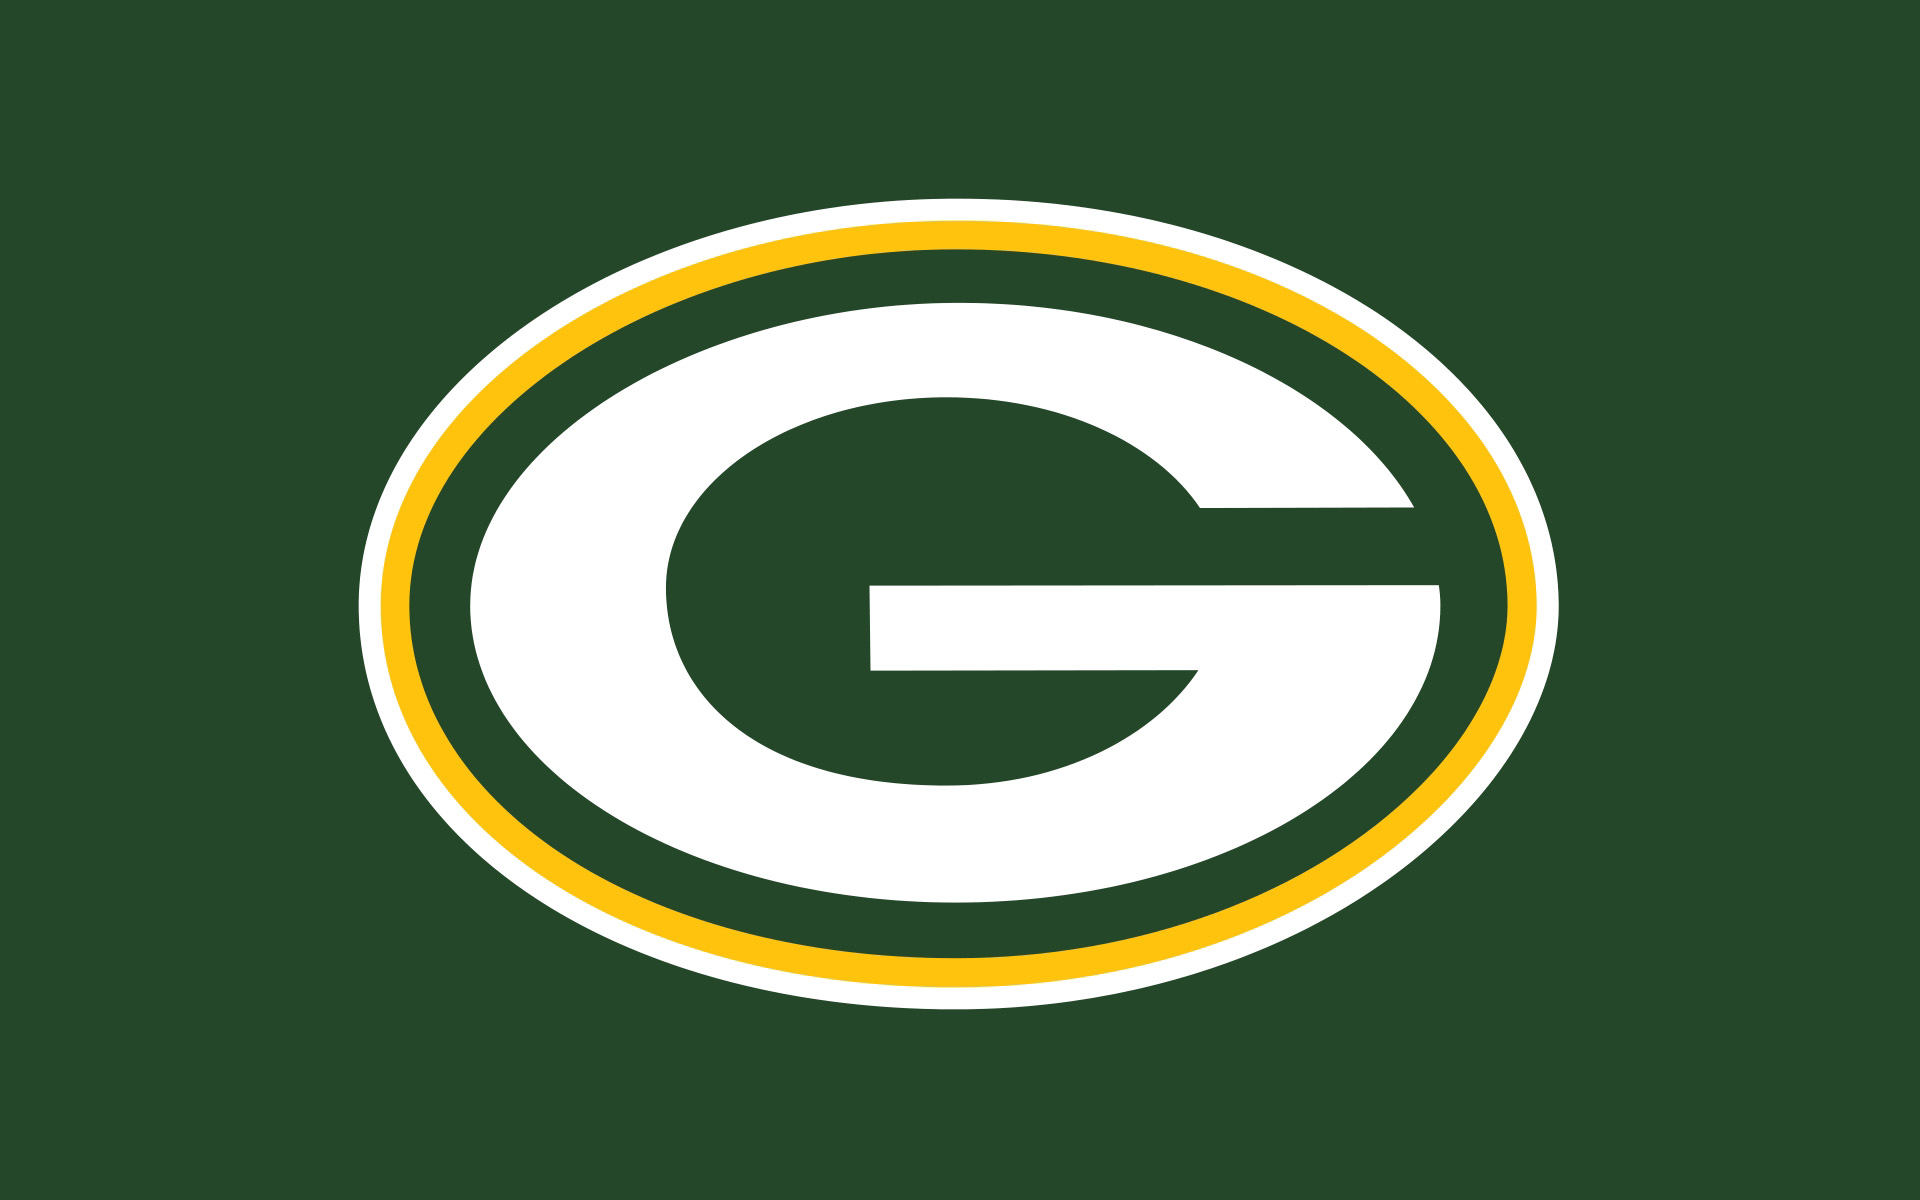 Green Bay Packers Wallpaper Background